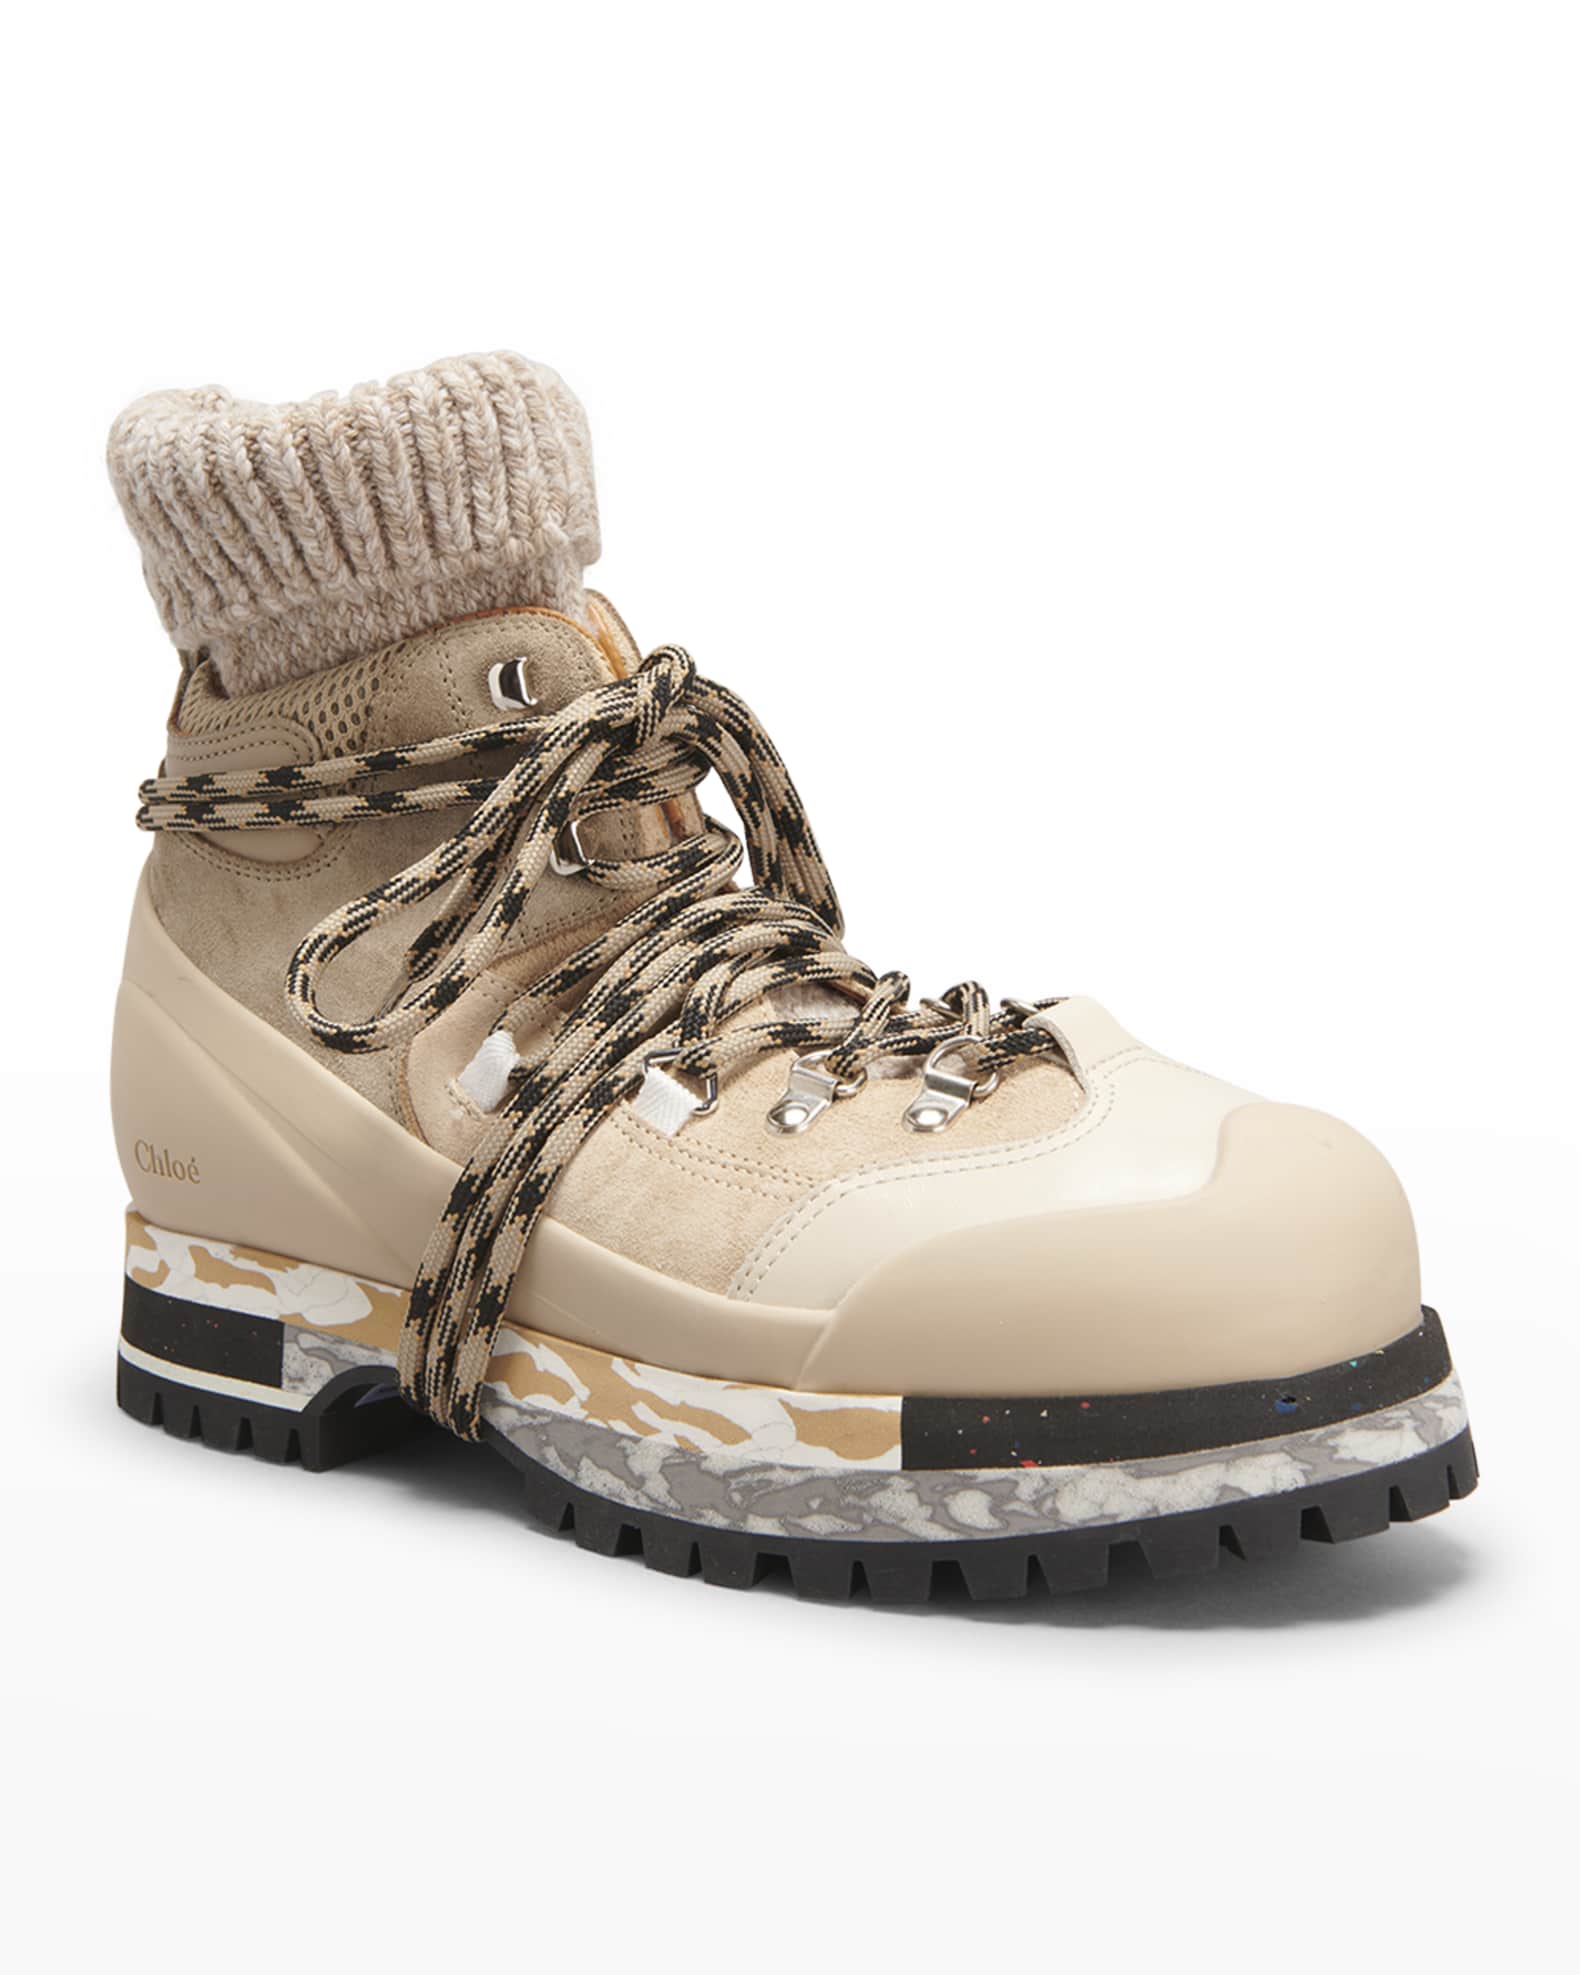 Chloe Nikie Mixed Leather Sporty Boots | Neiman Marcus